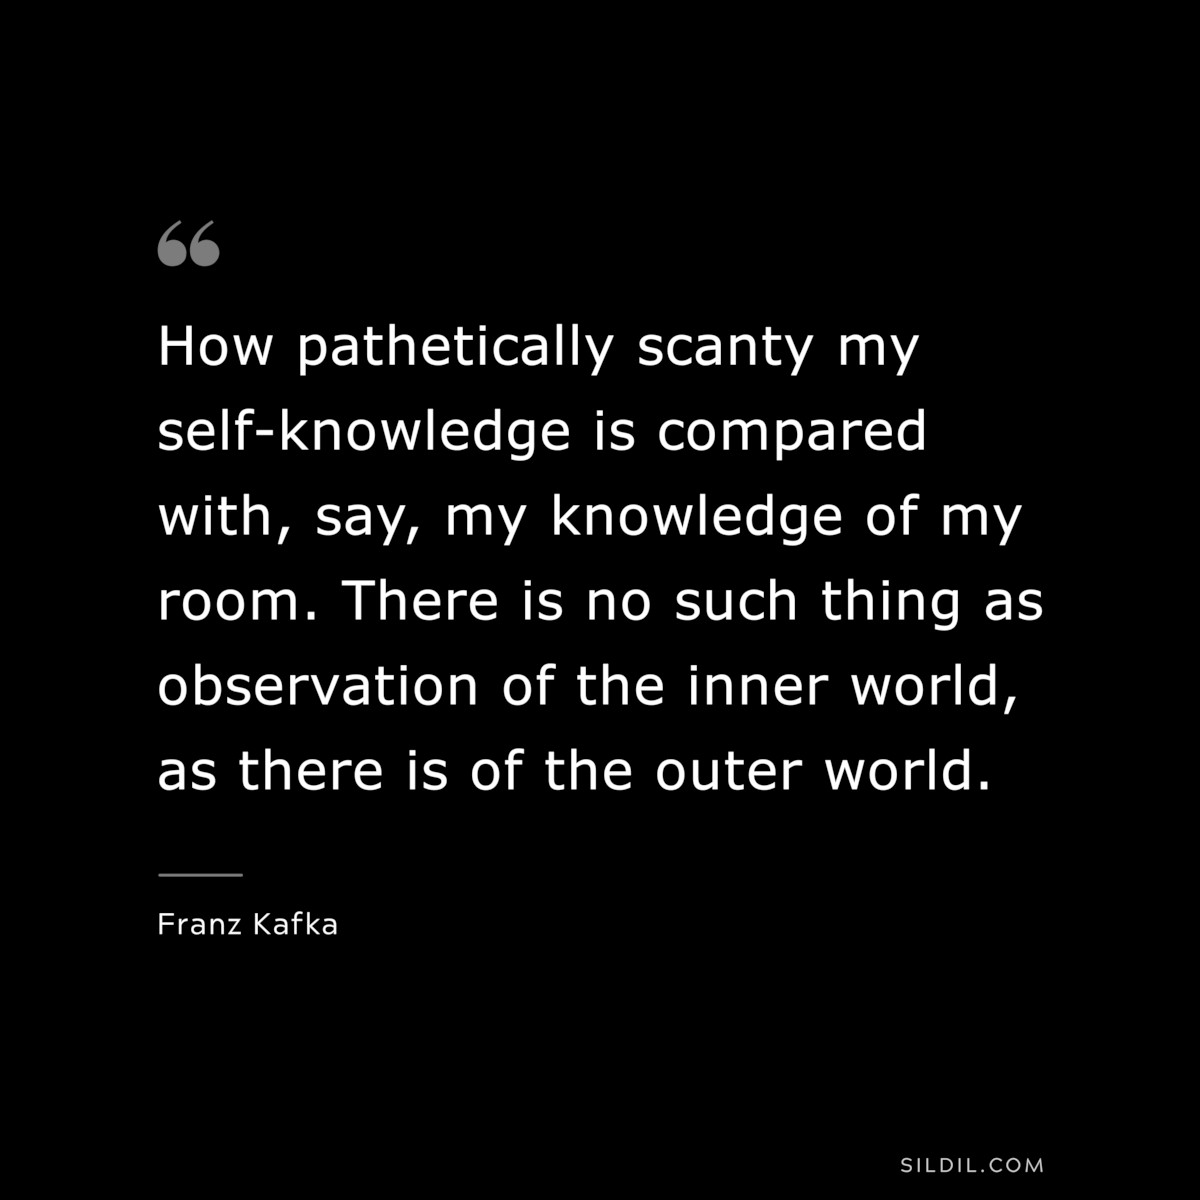 How pathetically scanty my self-knowledge is compared with, say, my knowledge of my room. There is no such thing as observation of the inner world, as there is of the outer world. ― Franz Kafka